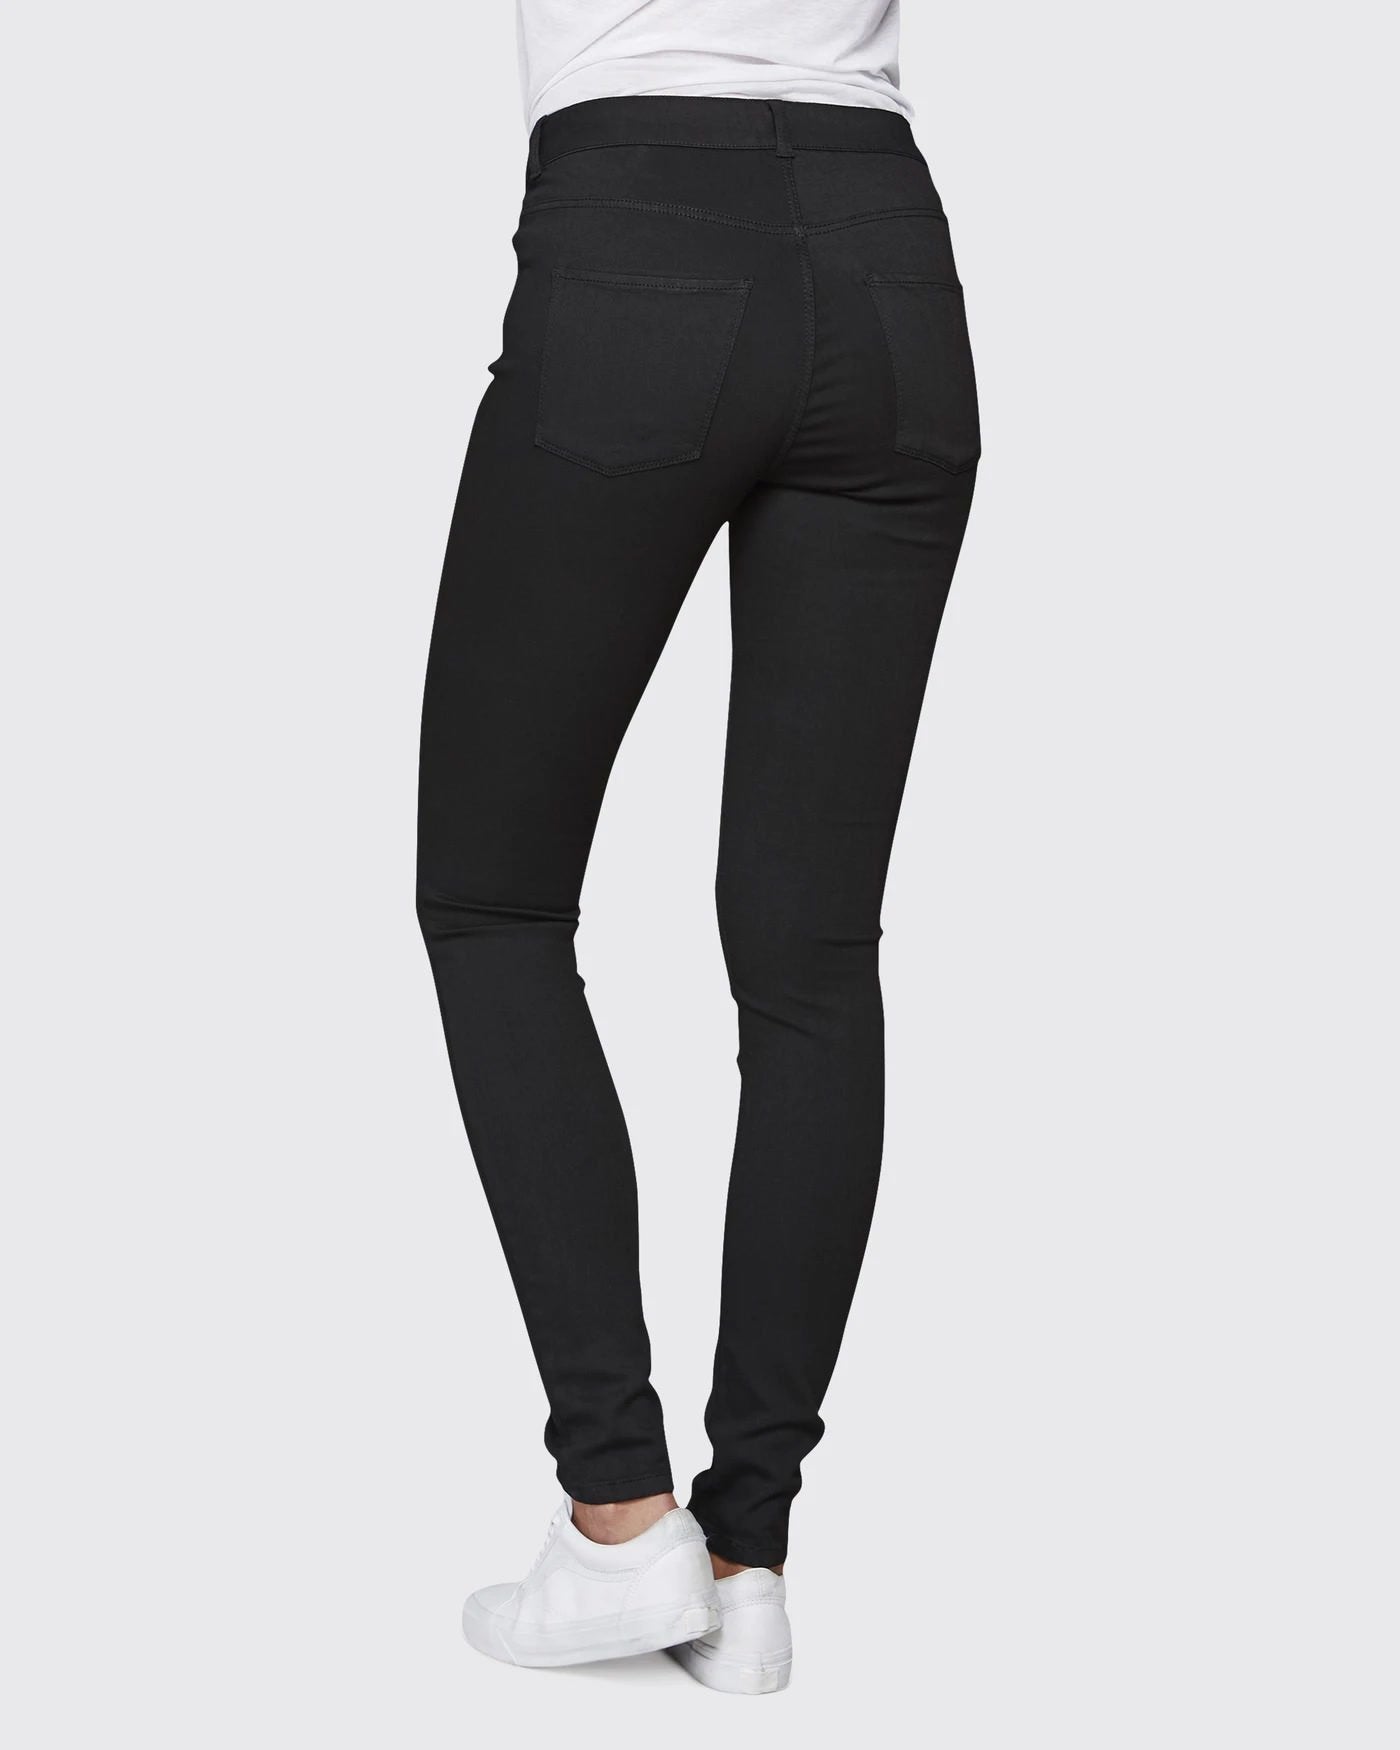 Lotus NW M308 Hyperform Jeans